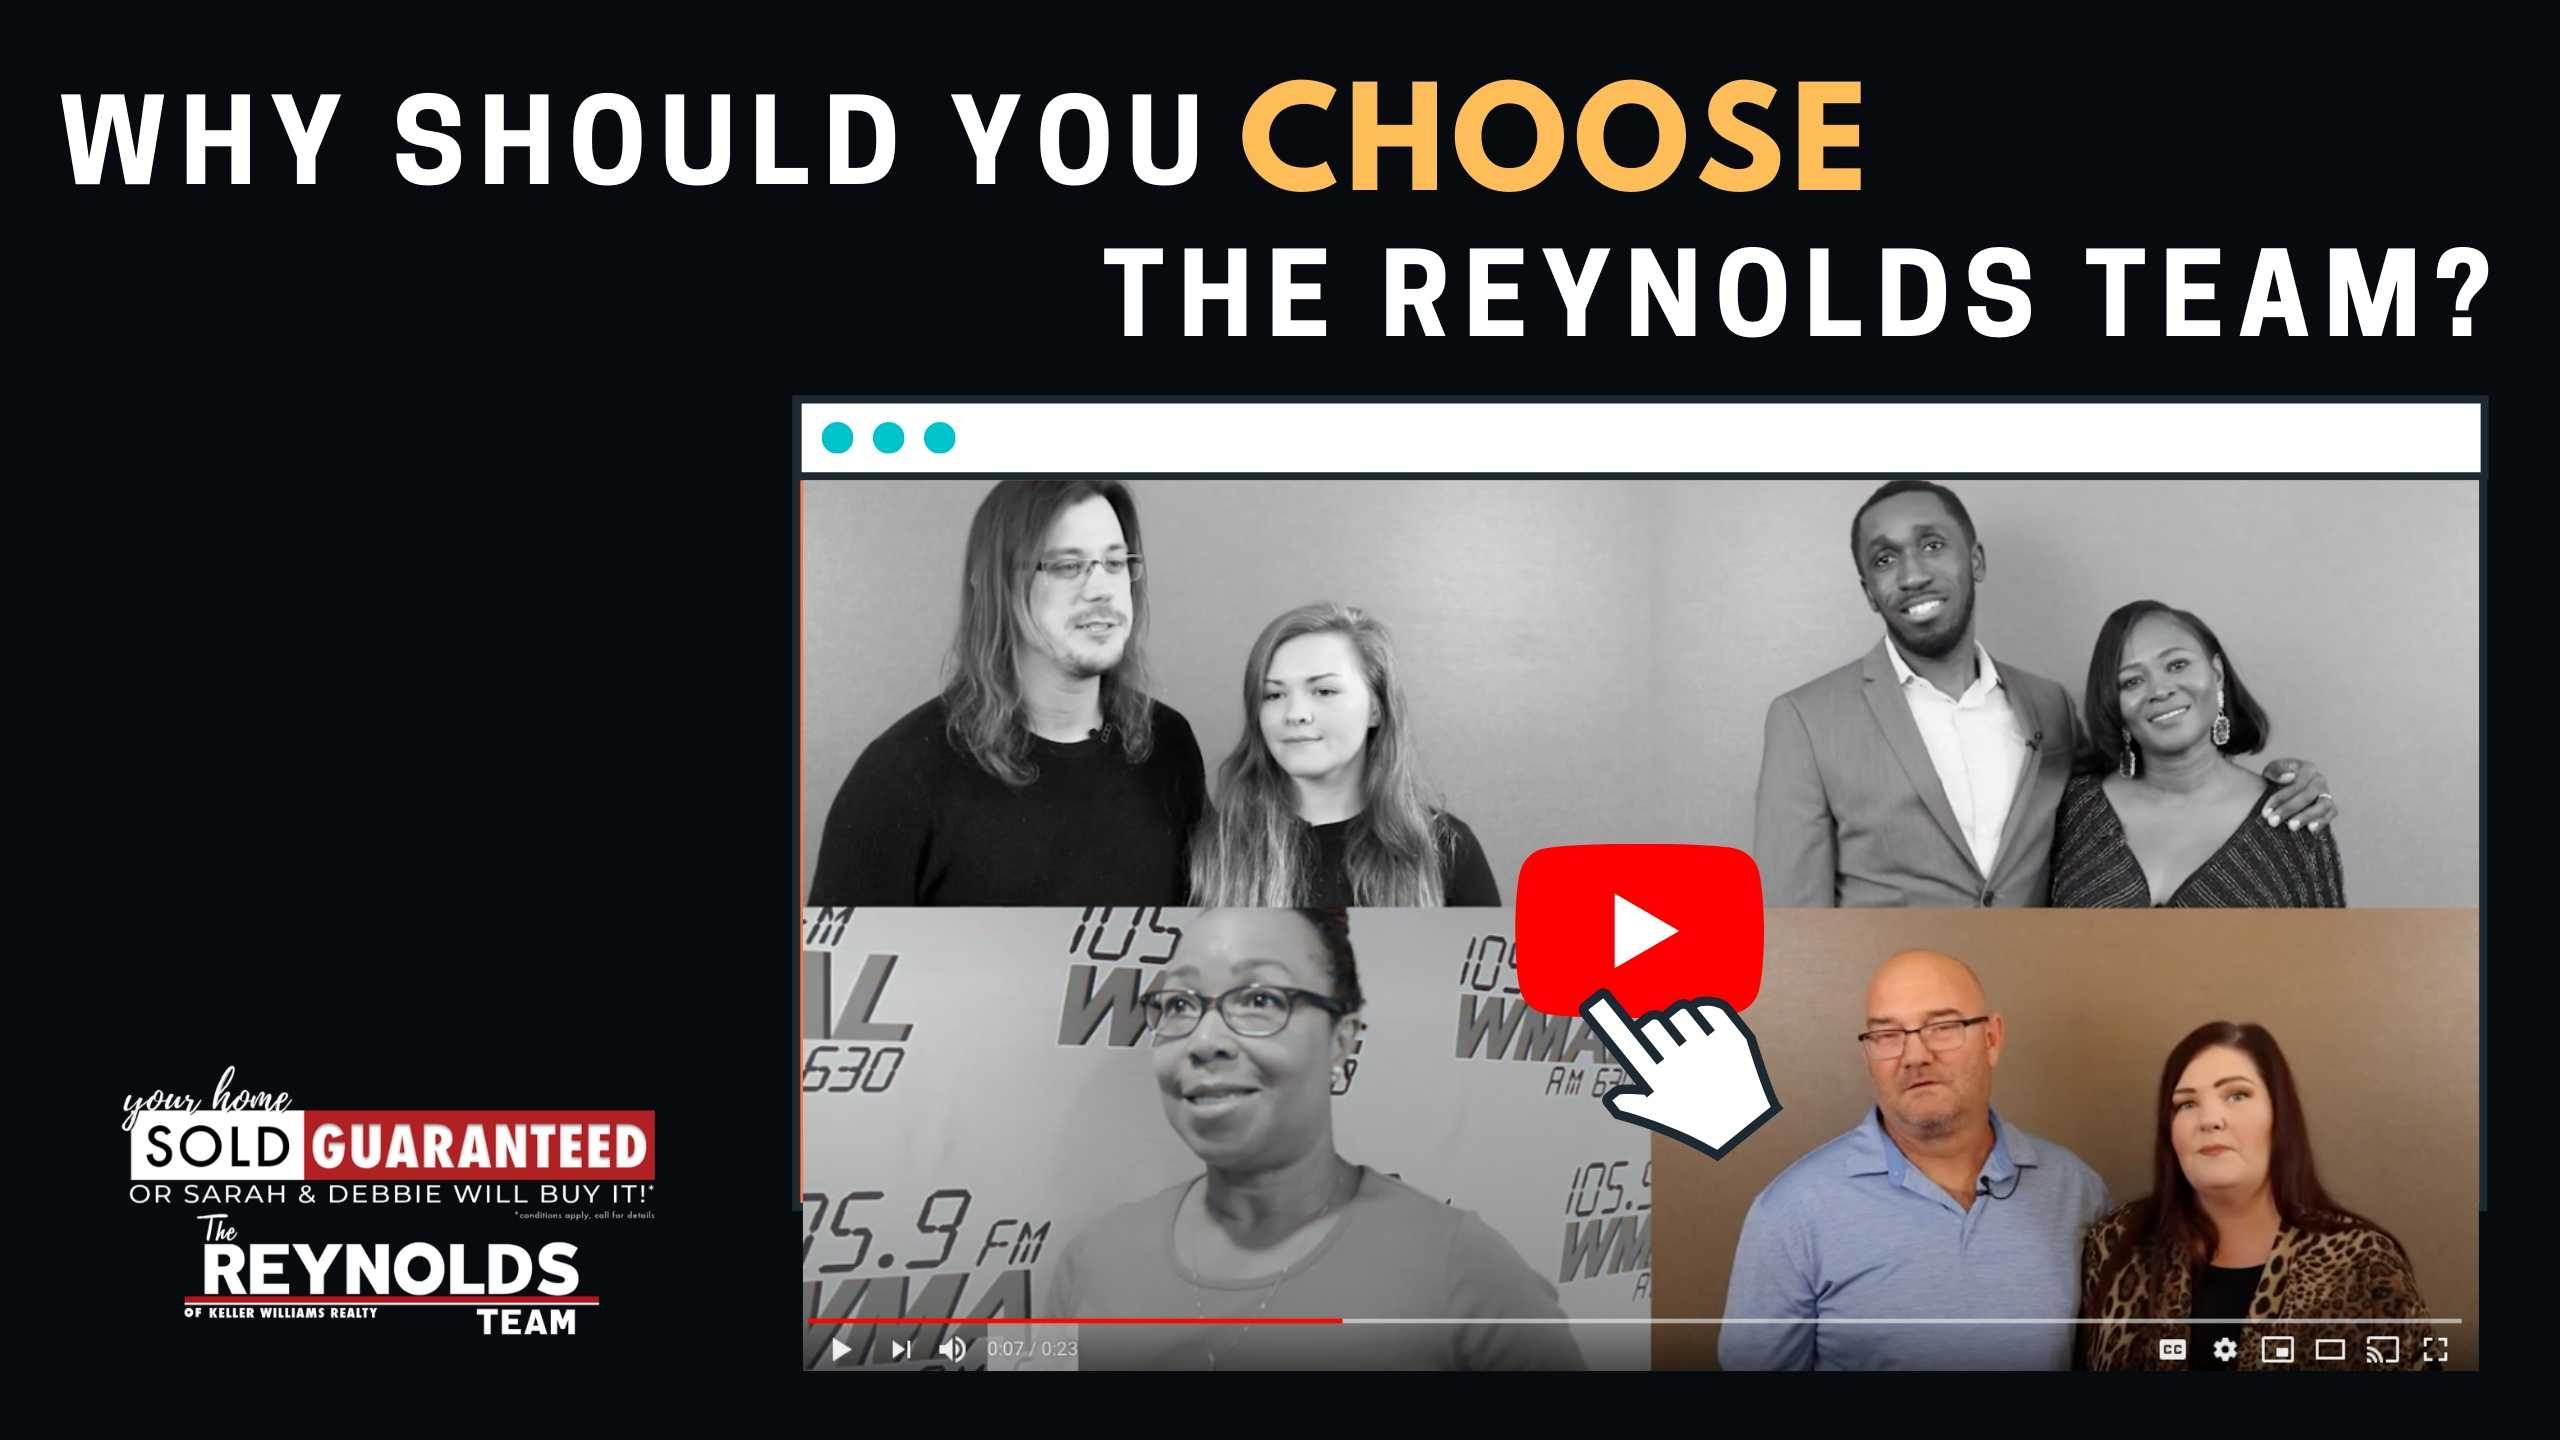 Why Should You Choose The Reynolds Team?